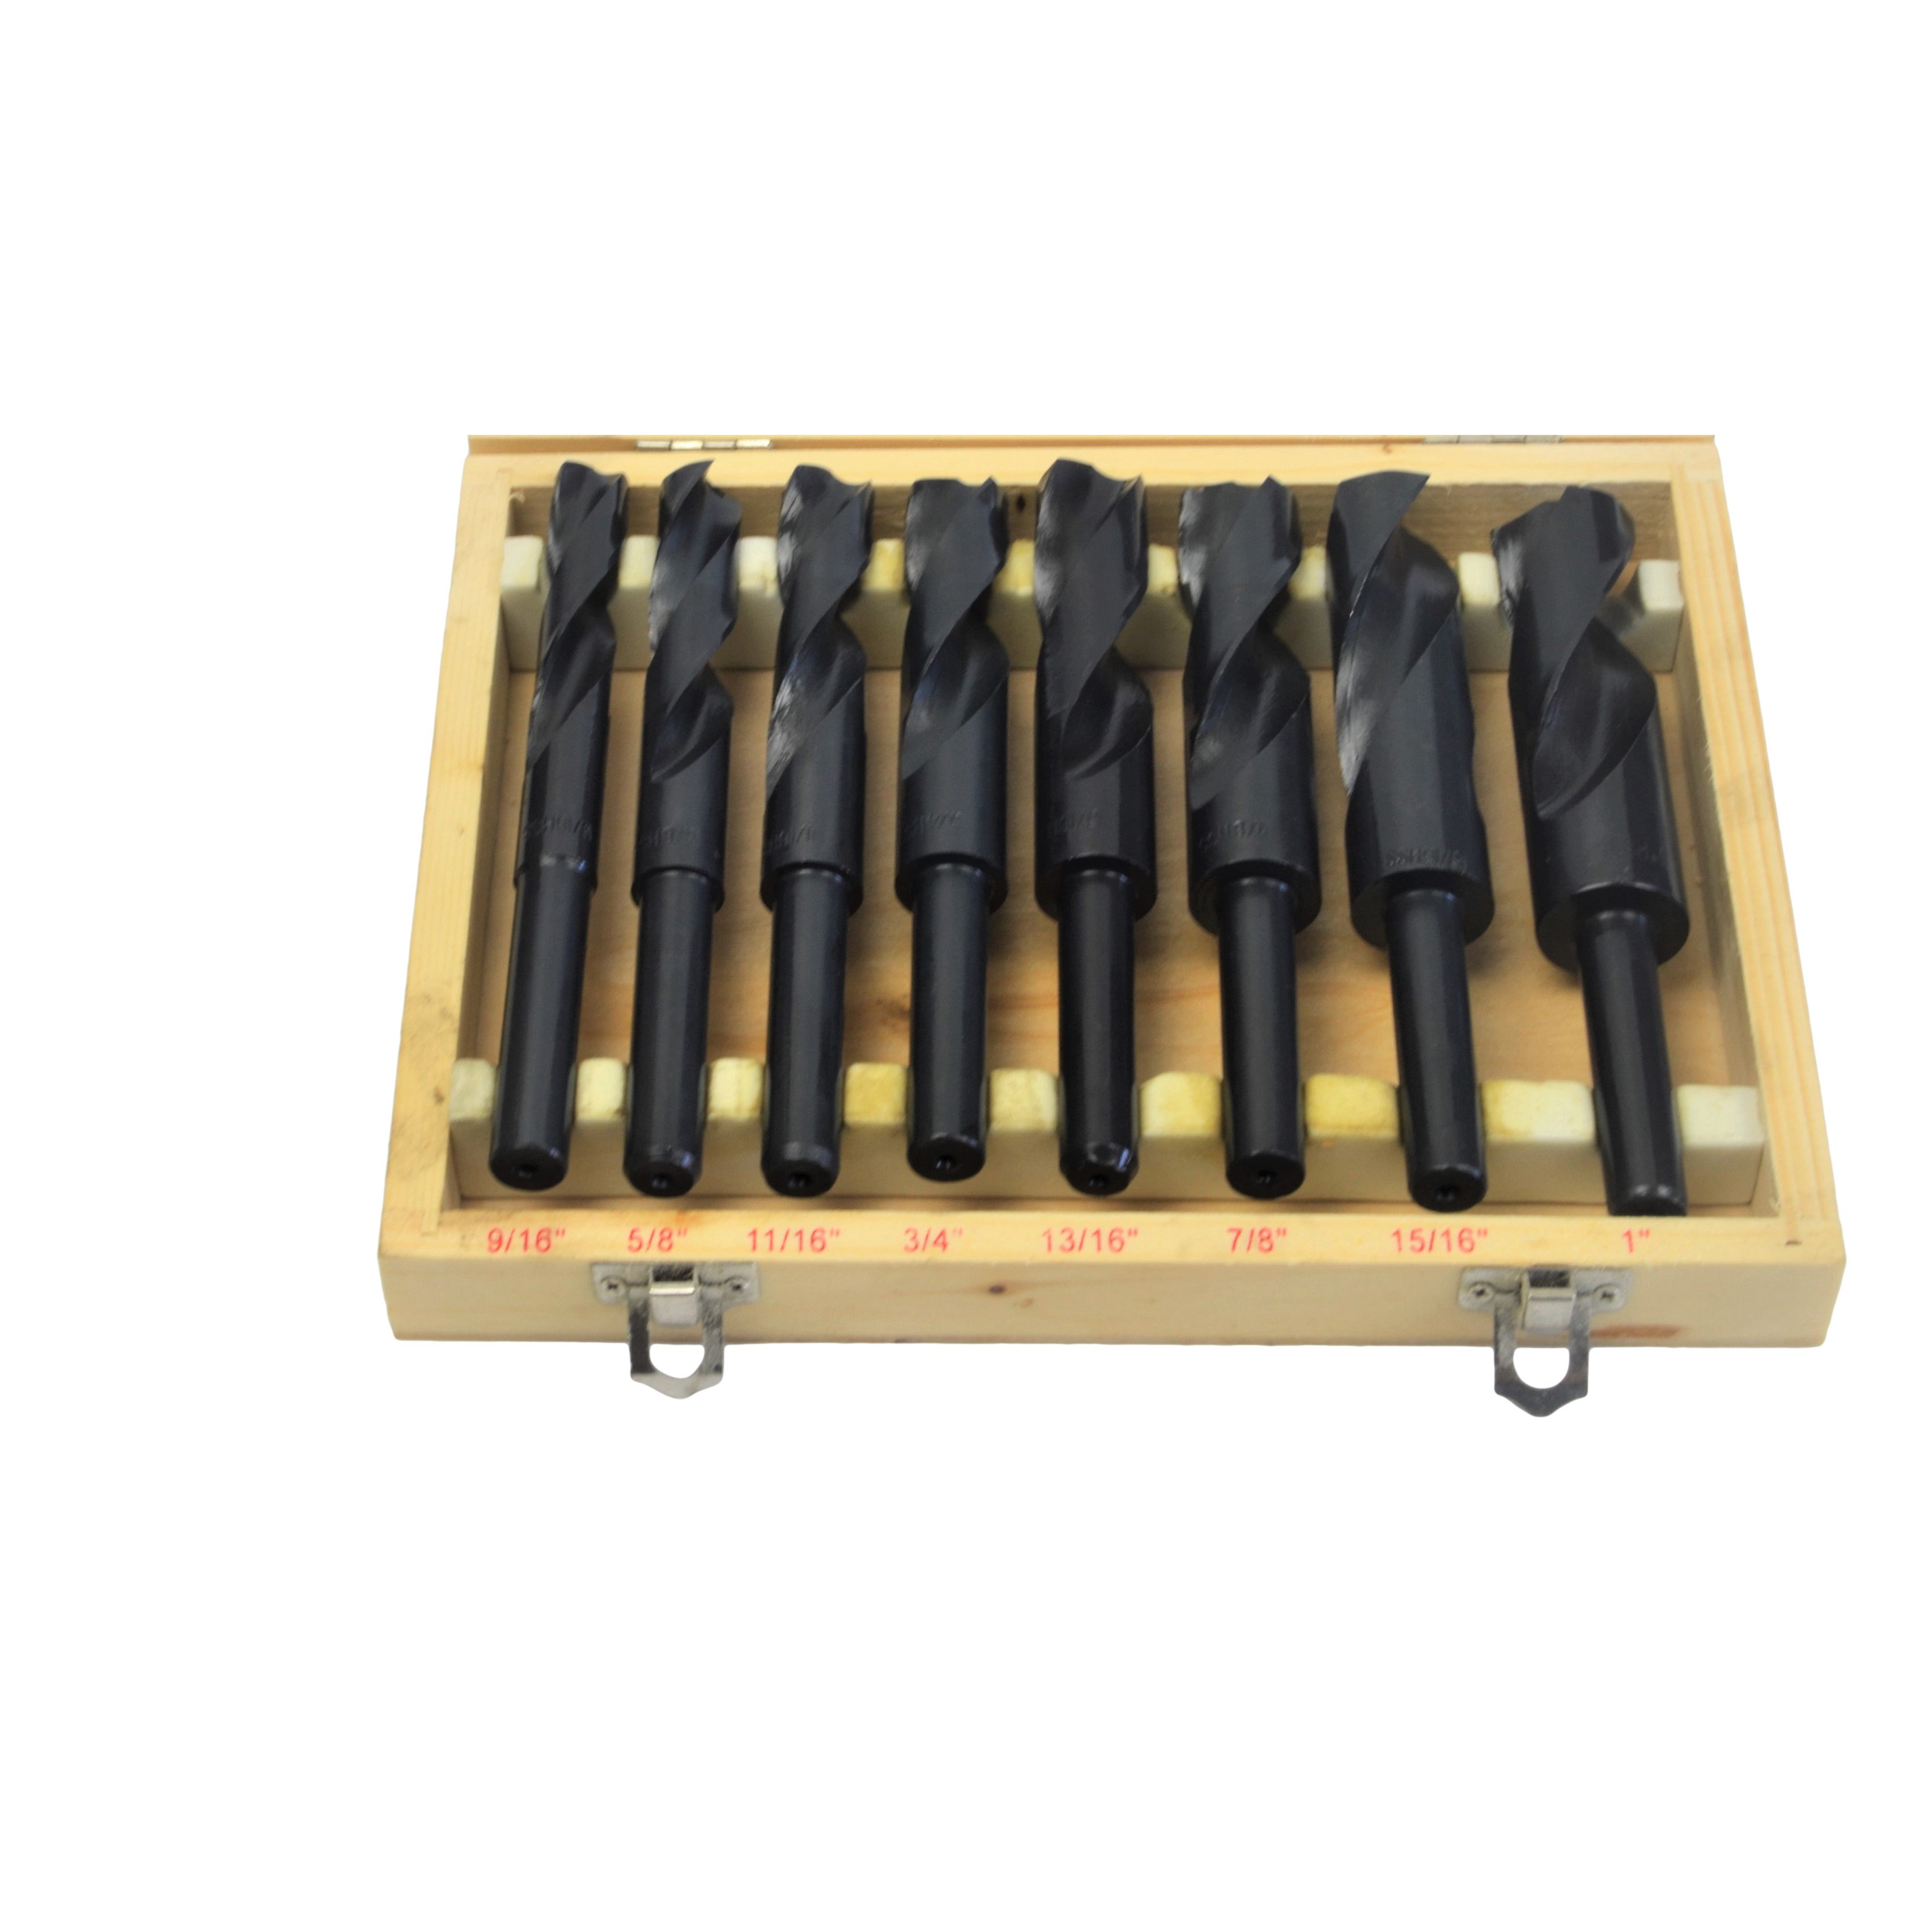 8 PC HSS IMPERIAL 1/2 REDUCED SHANK DRILL SET DRILLS 9/16 up to 1" 